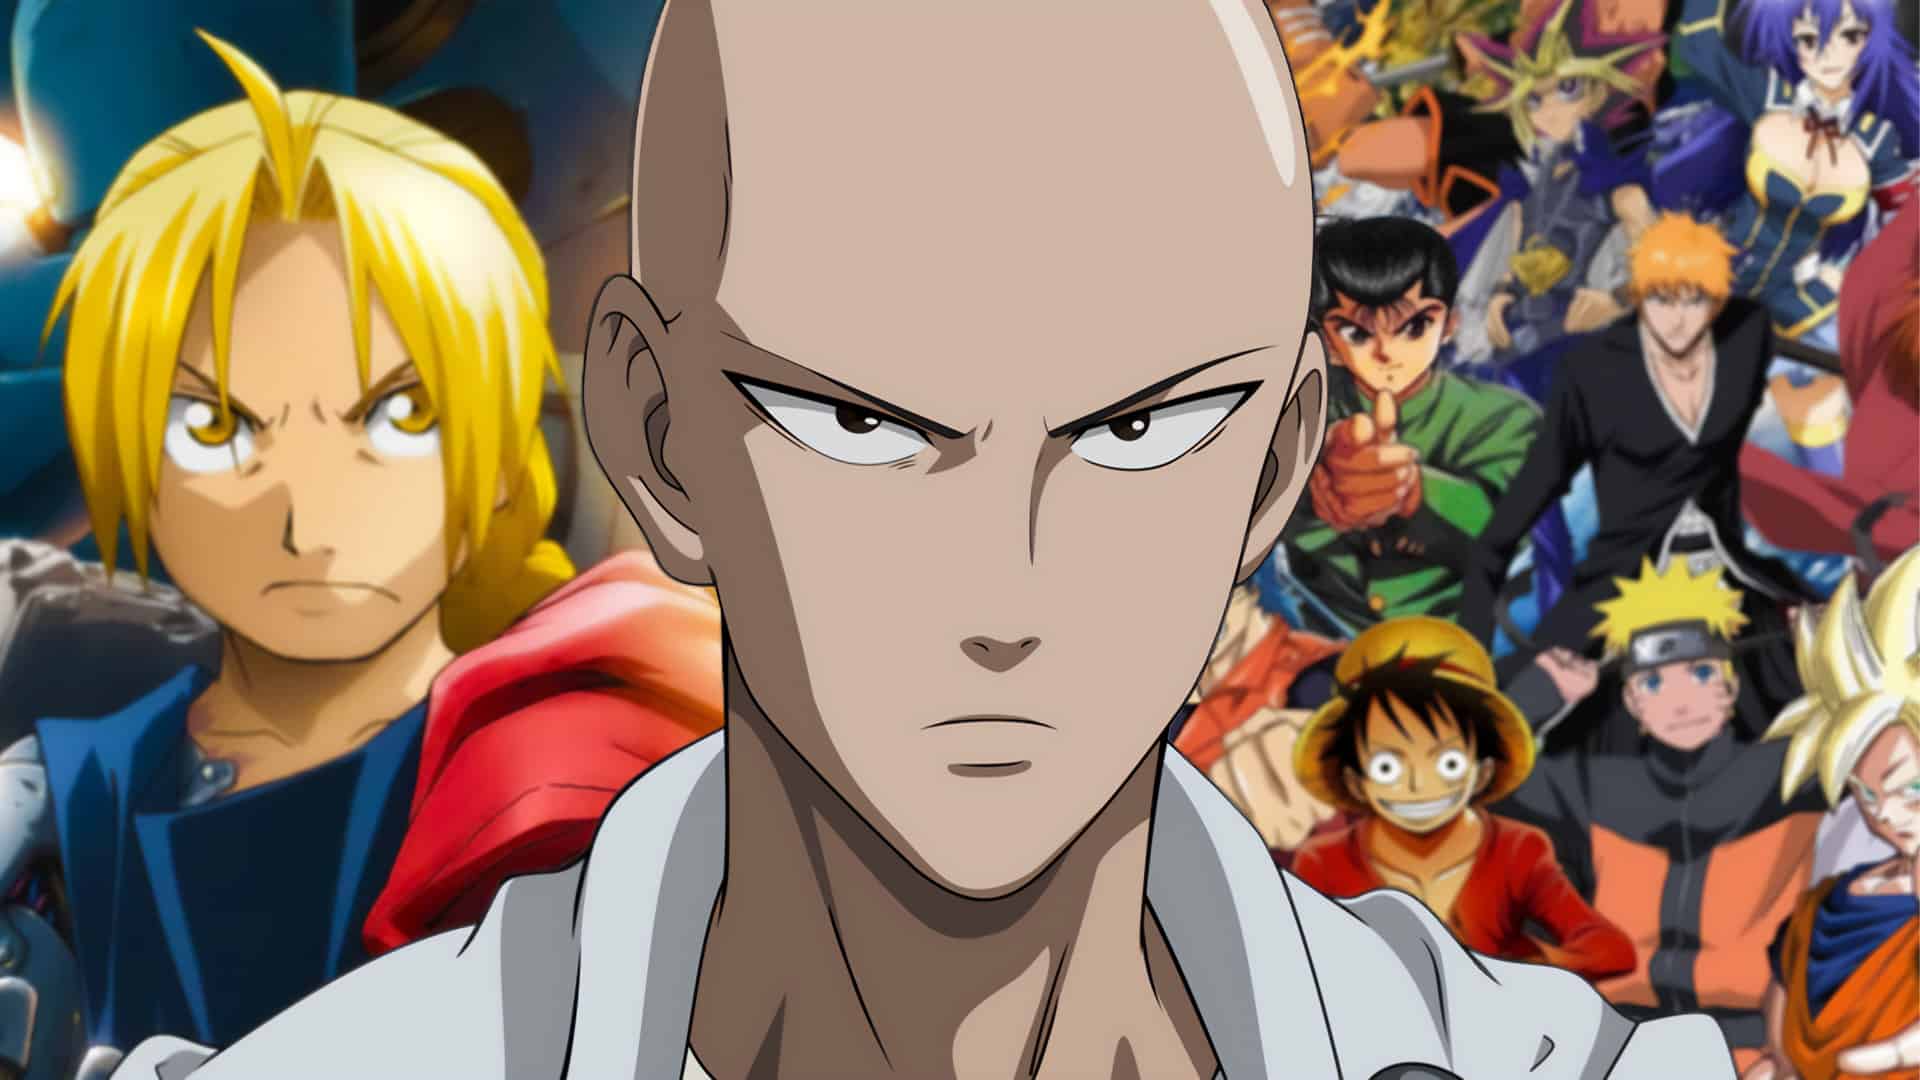 33 Strongest Anime Characters Of All Time, Ranked